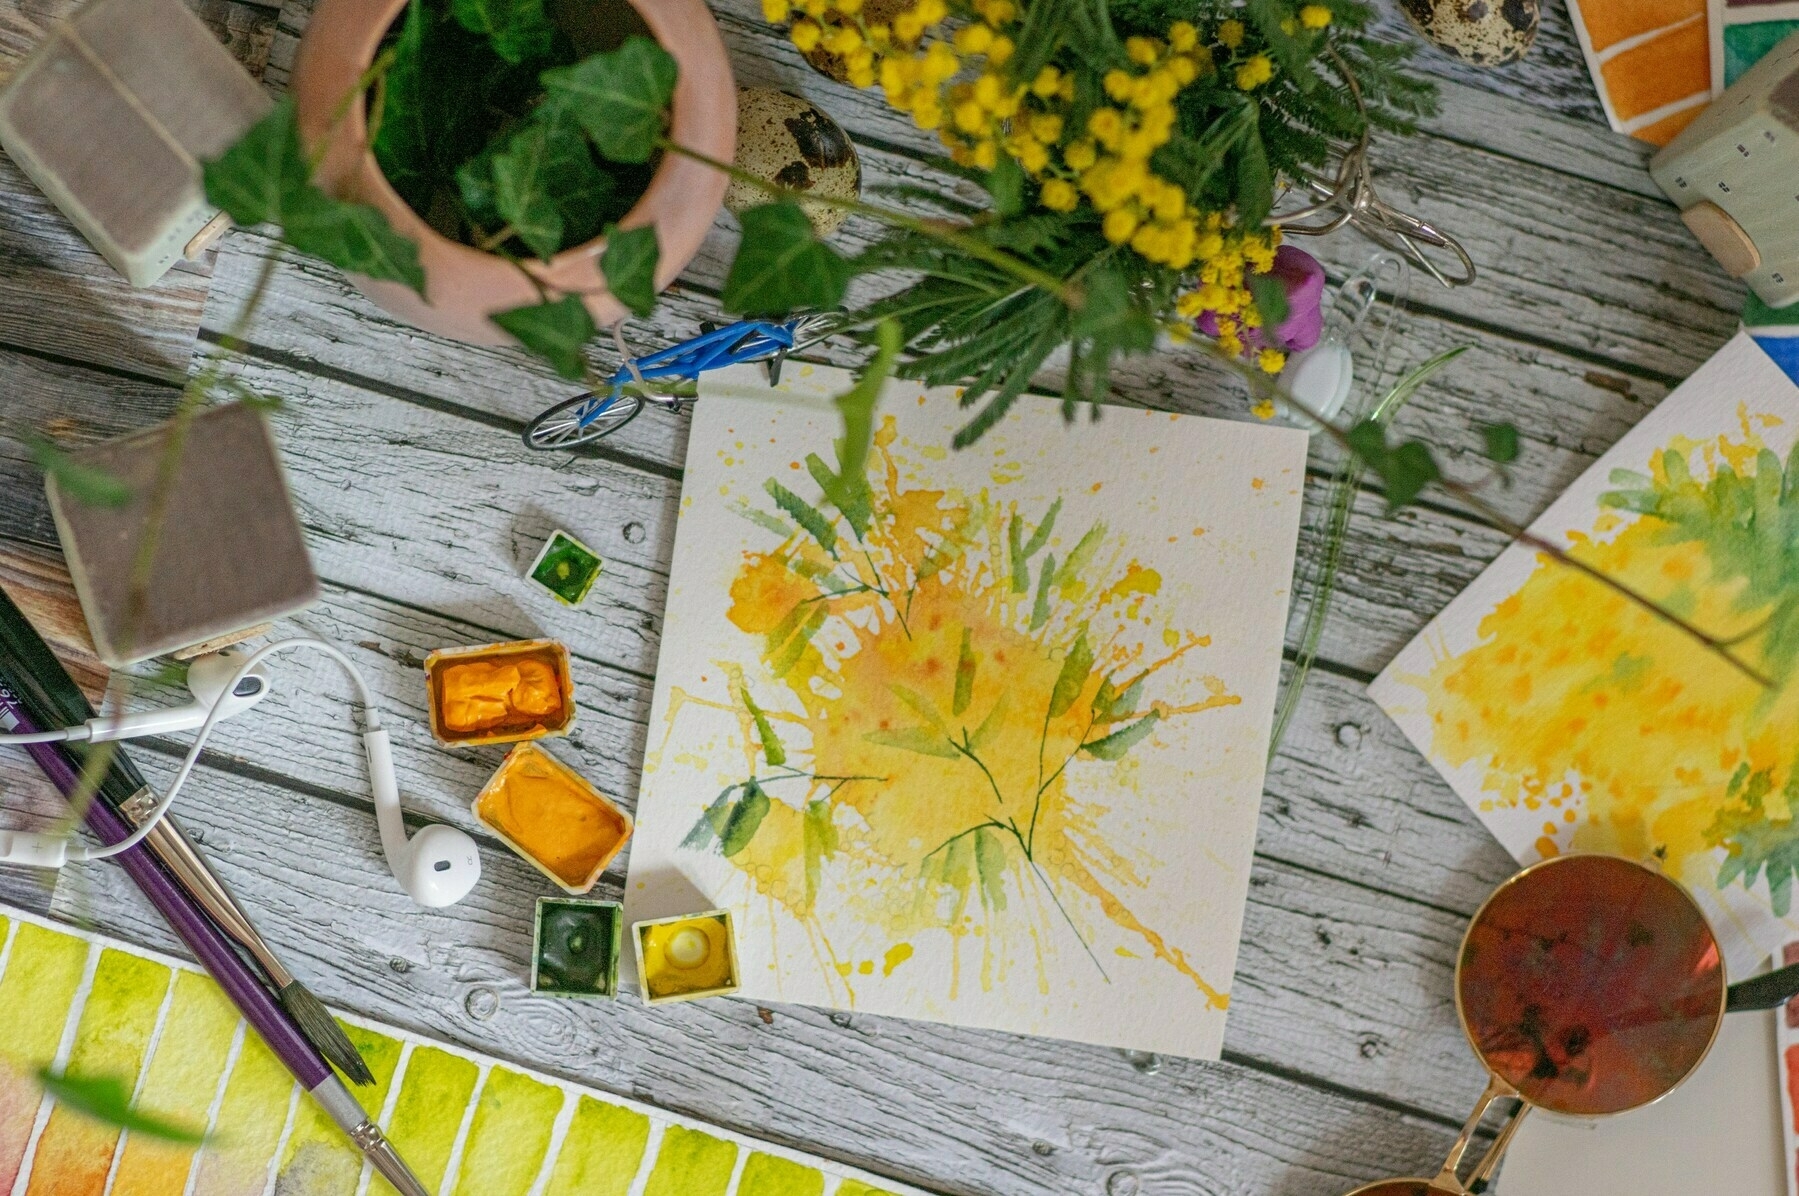 A creative workspace with watercolor paintings featuring yellow and green floral motifs, paint cubes, brushes, and earphones on a rustic wooden table. Amongst these items are a potted plant, a bouquet of yellow wildflowers, and a pair of sunglasses, all suggesting an artist's break in progress.